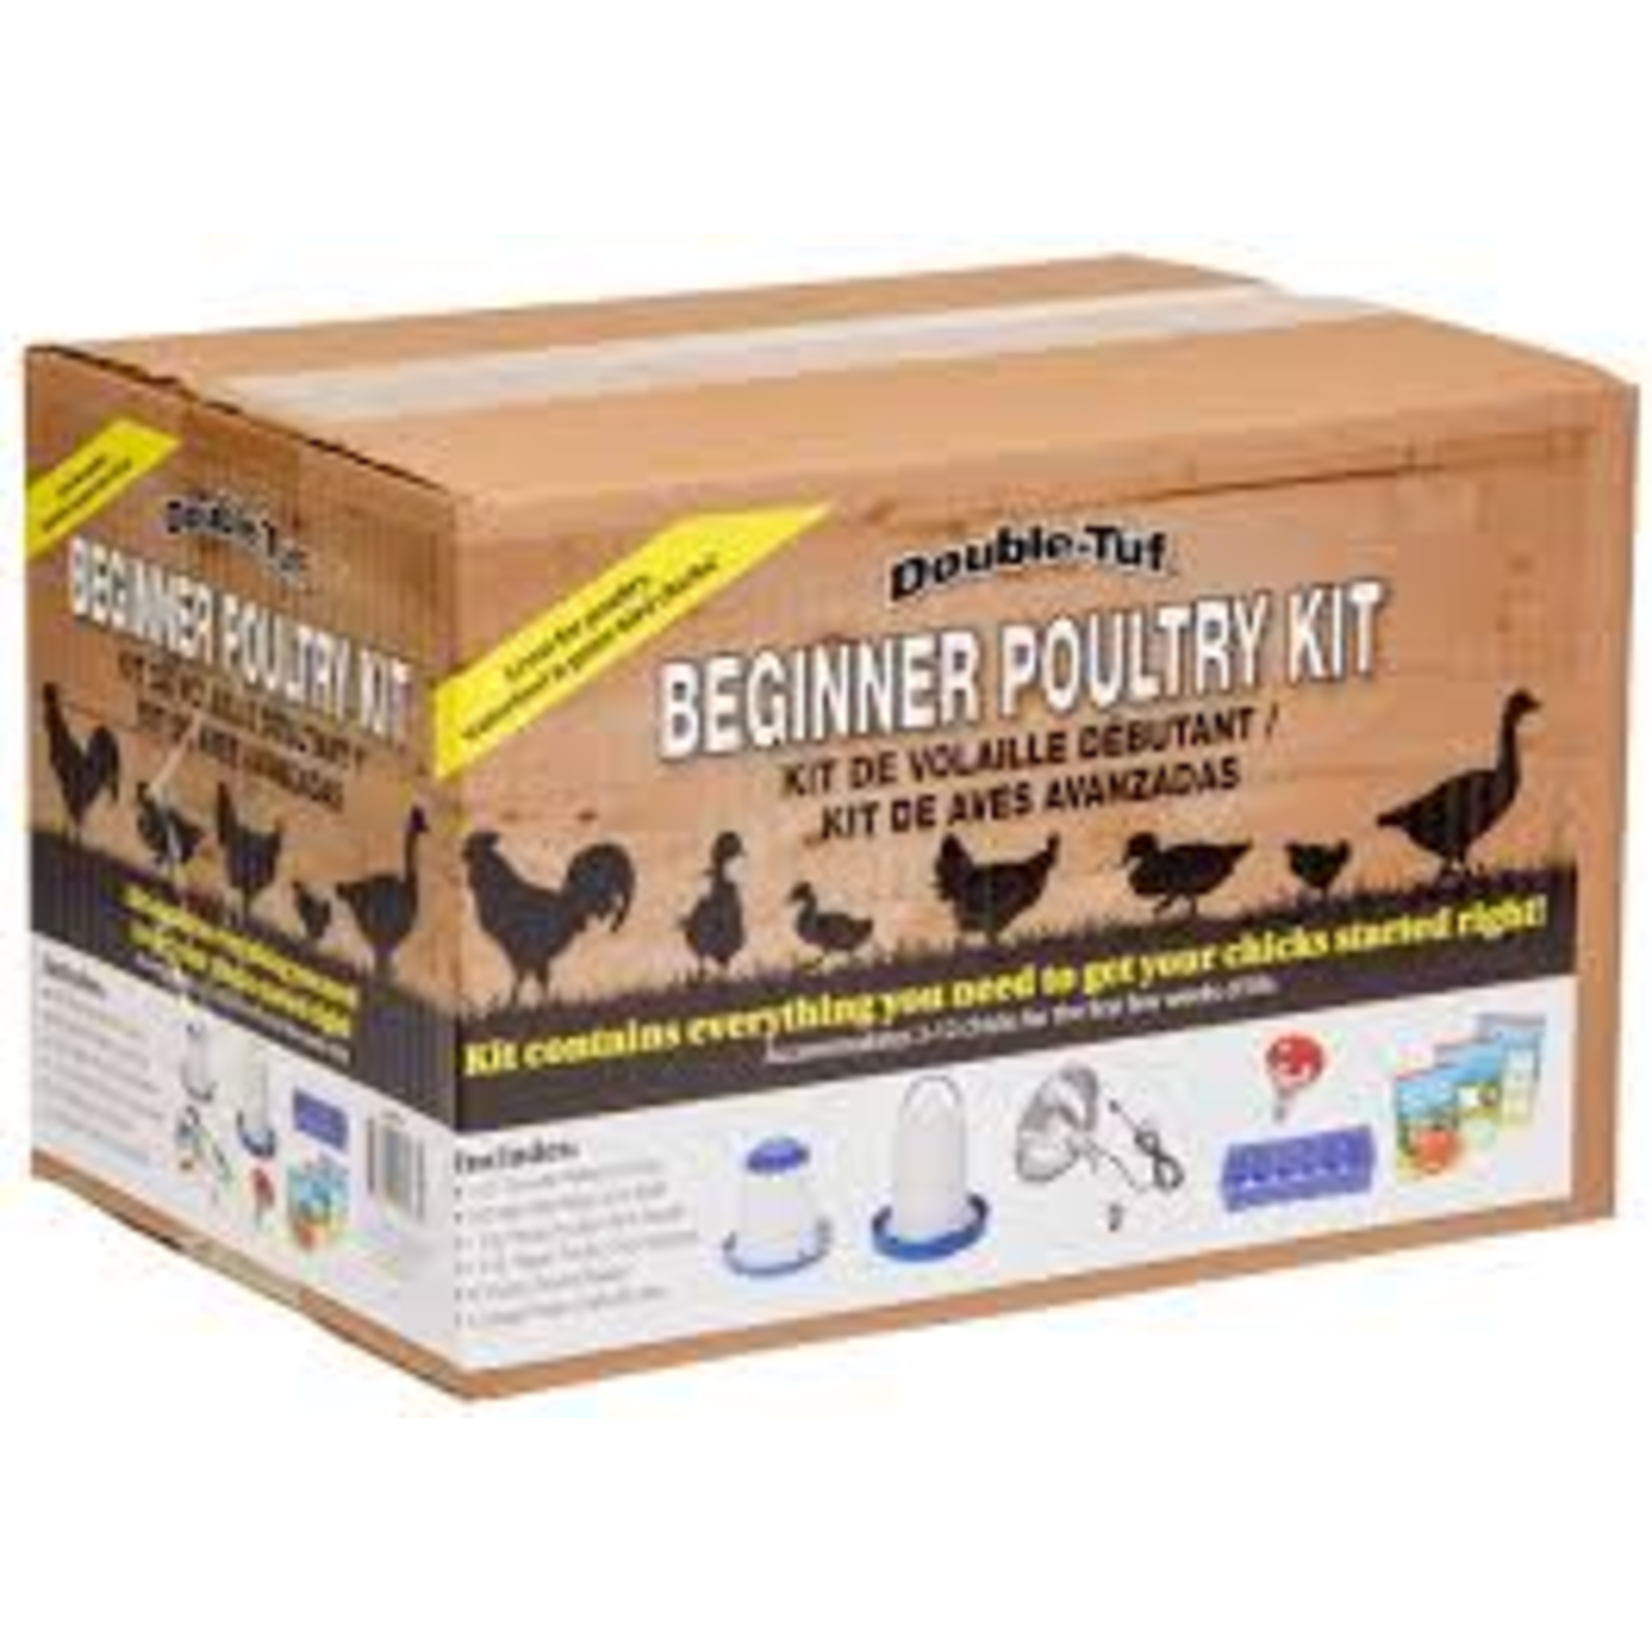 Double-Tuf Poultry Kit Beginners